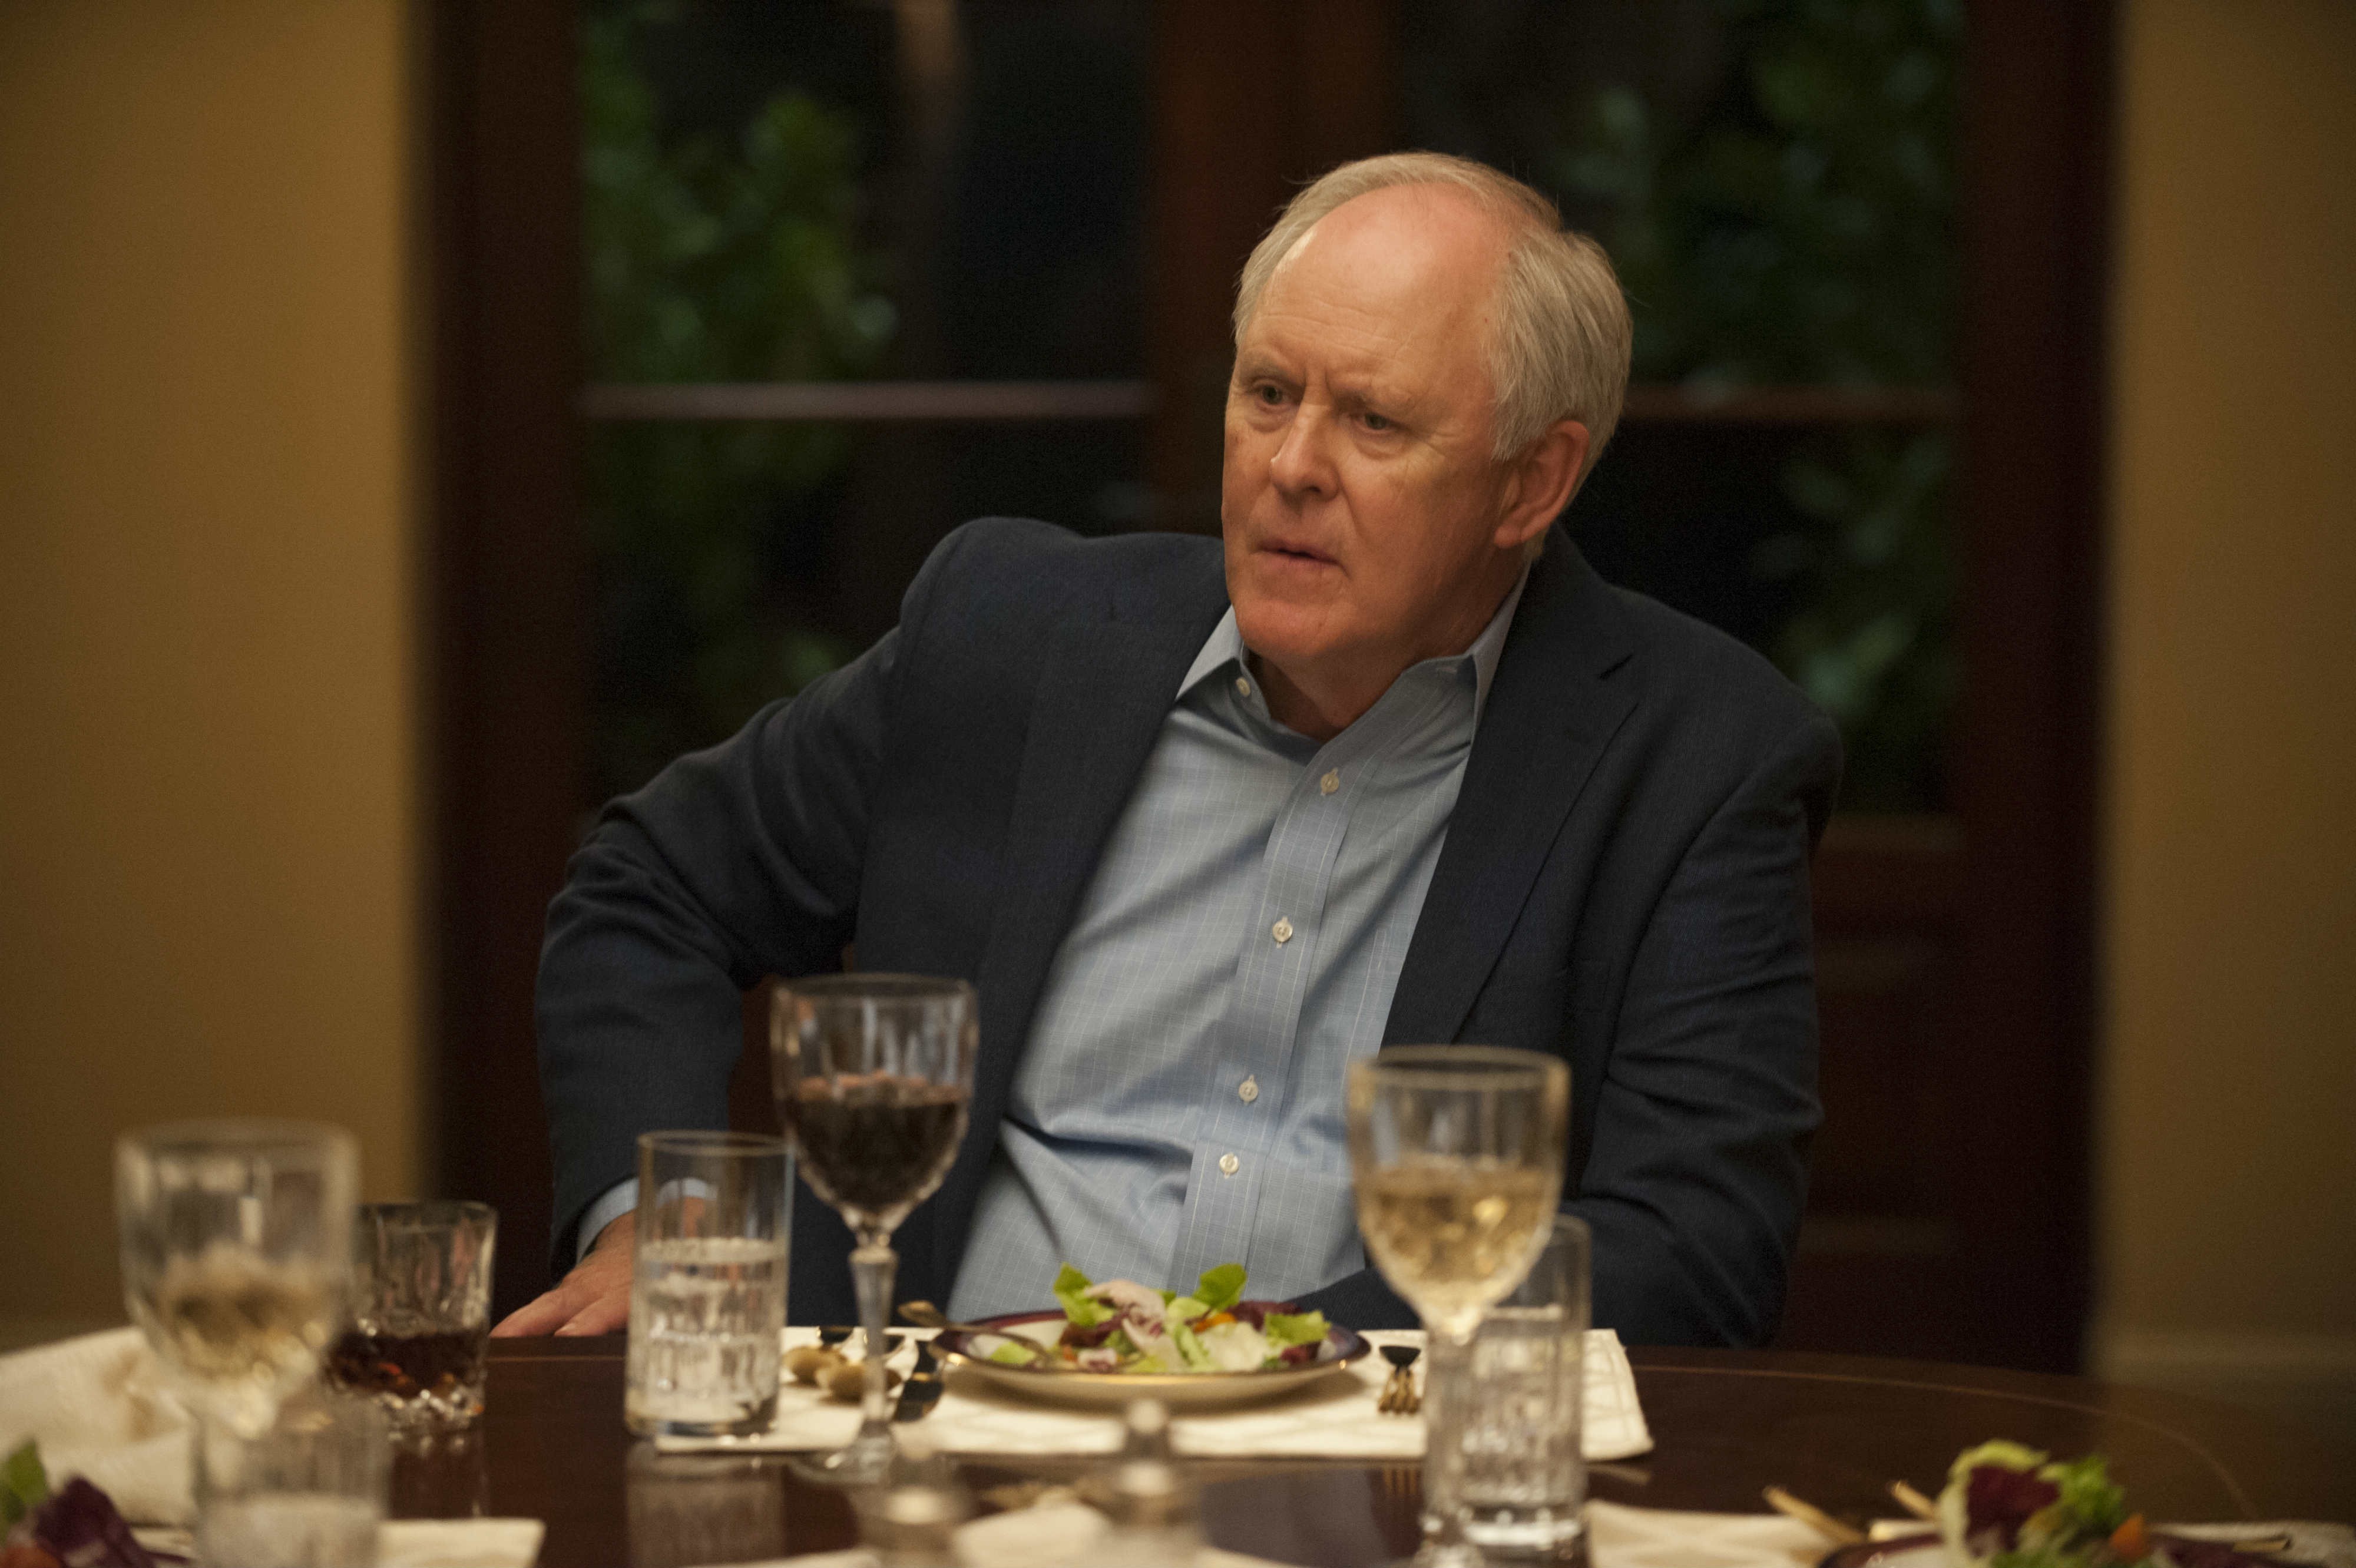 Lithgow: “No villain thinks of himself as a villain." - LACEY TERRELL/ROADSIDE ATTRACTIONS